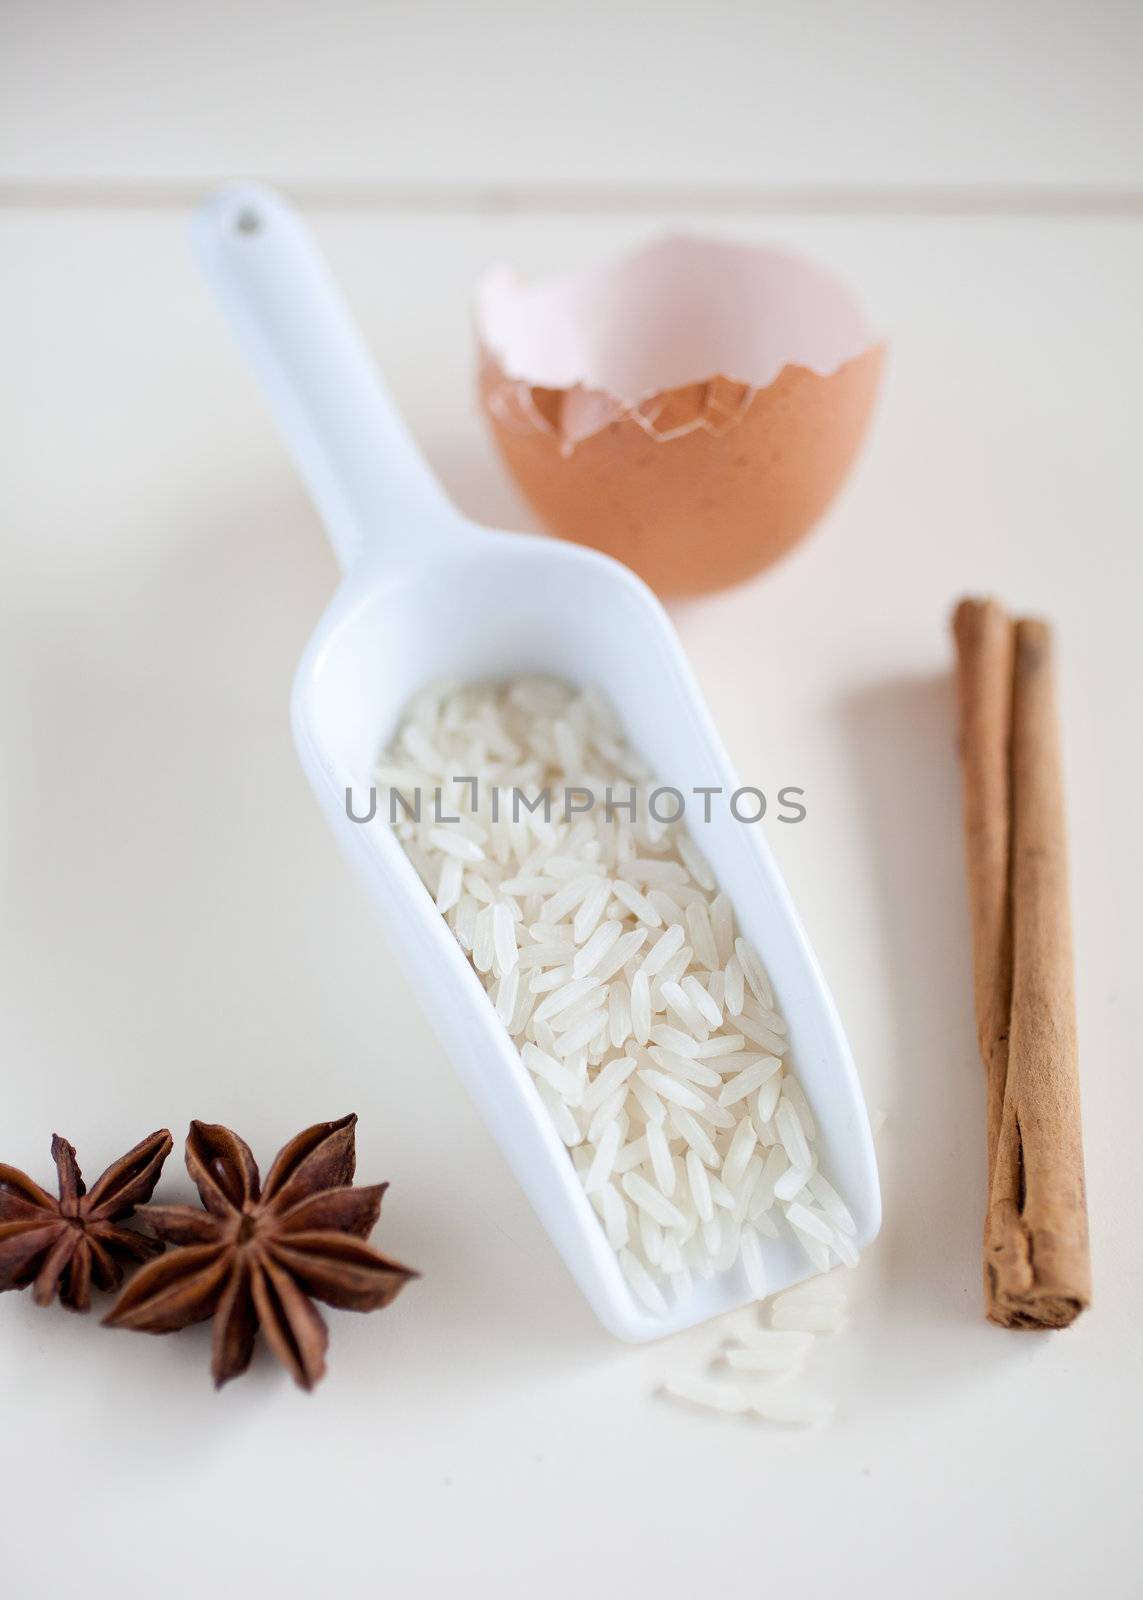 Ingredients for arroz con leche by Fotosmurf